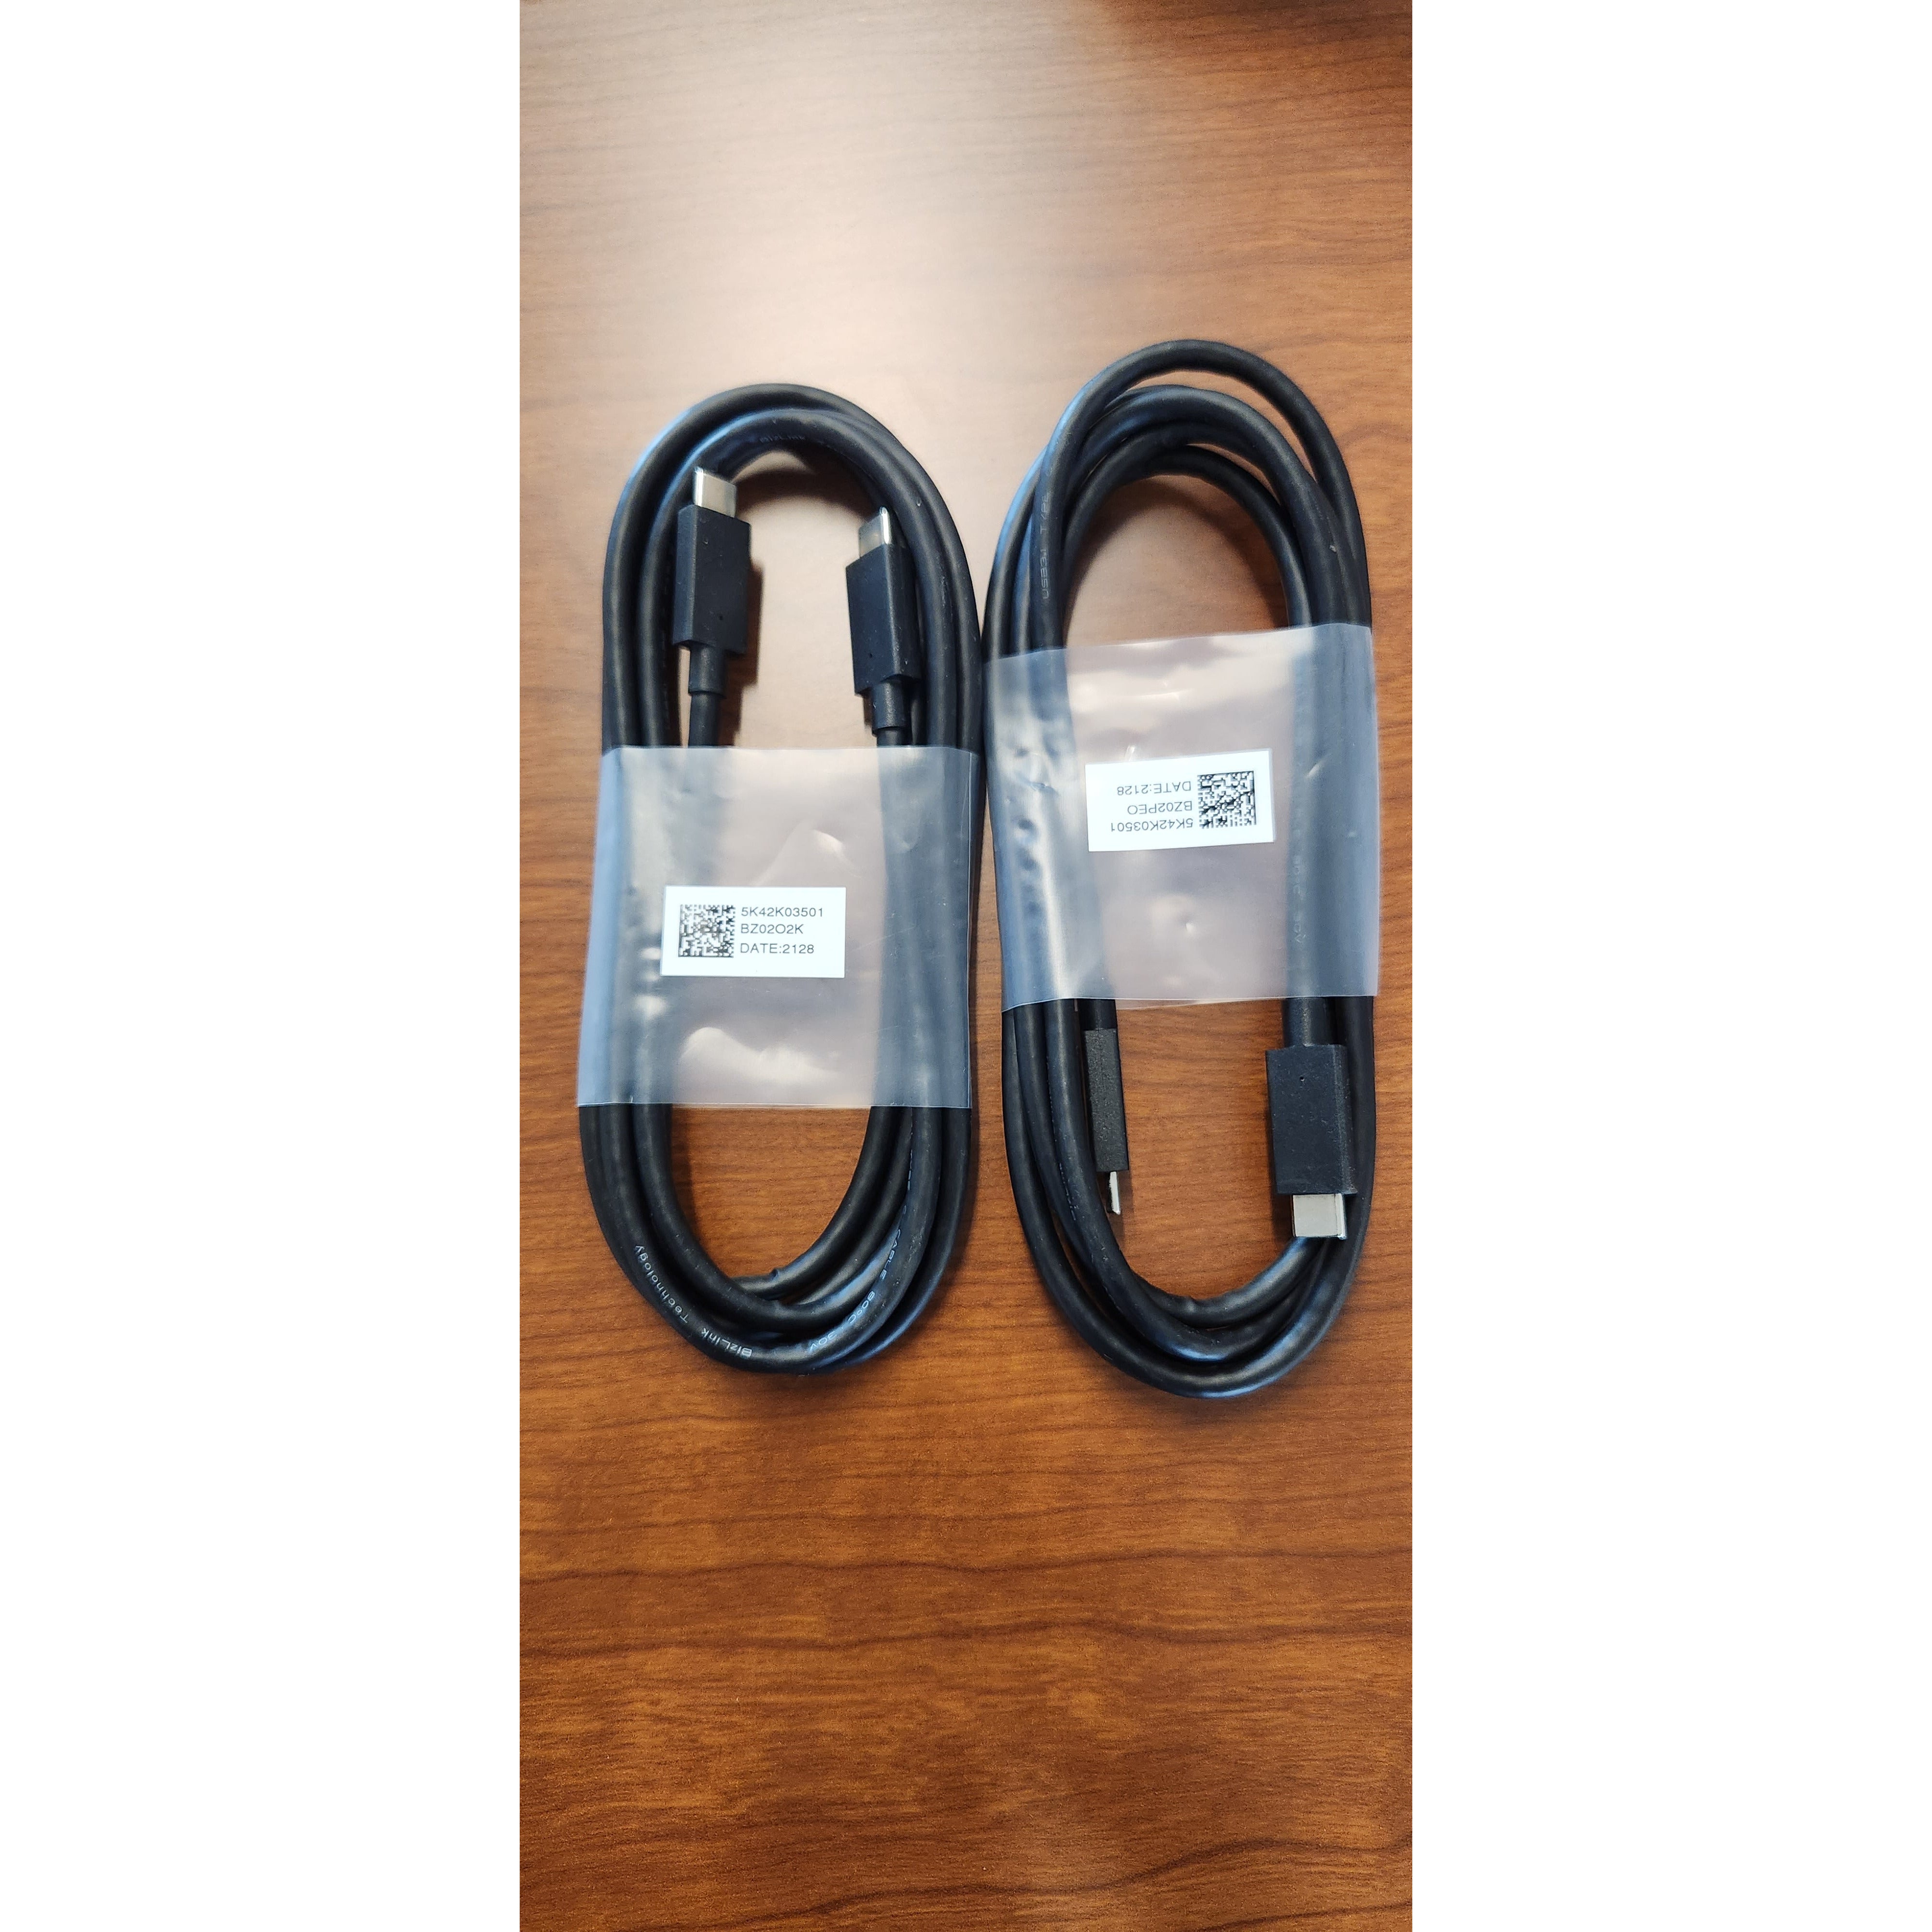 USB-C to USB-C Display Cable or Monitor Cable "Genuine Dell" 6ft